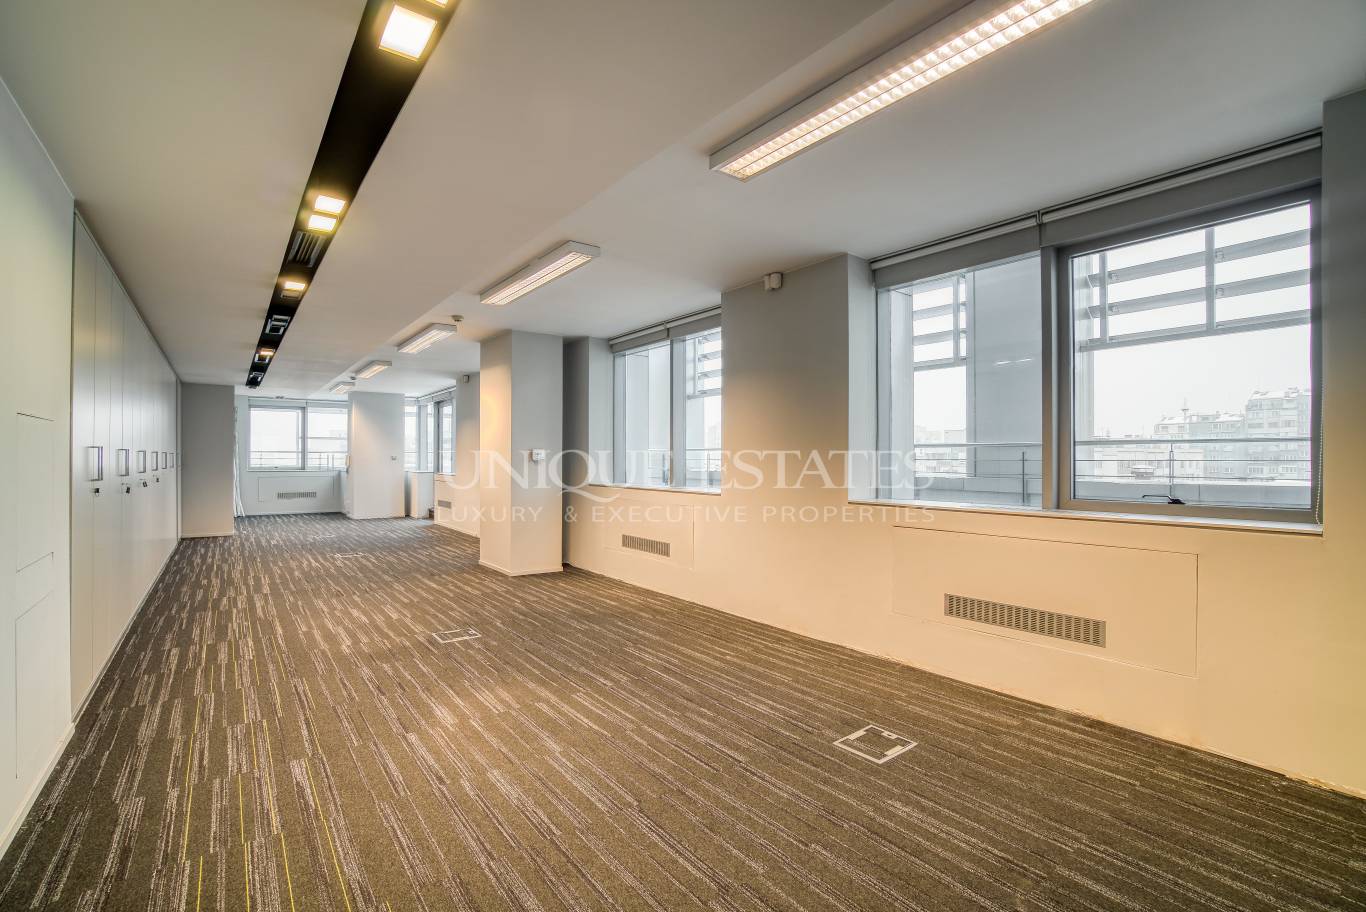 Office for rent in Sofia, Bulgaria Blvd with listing ID: K12488 - image 3